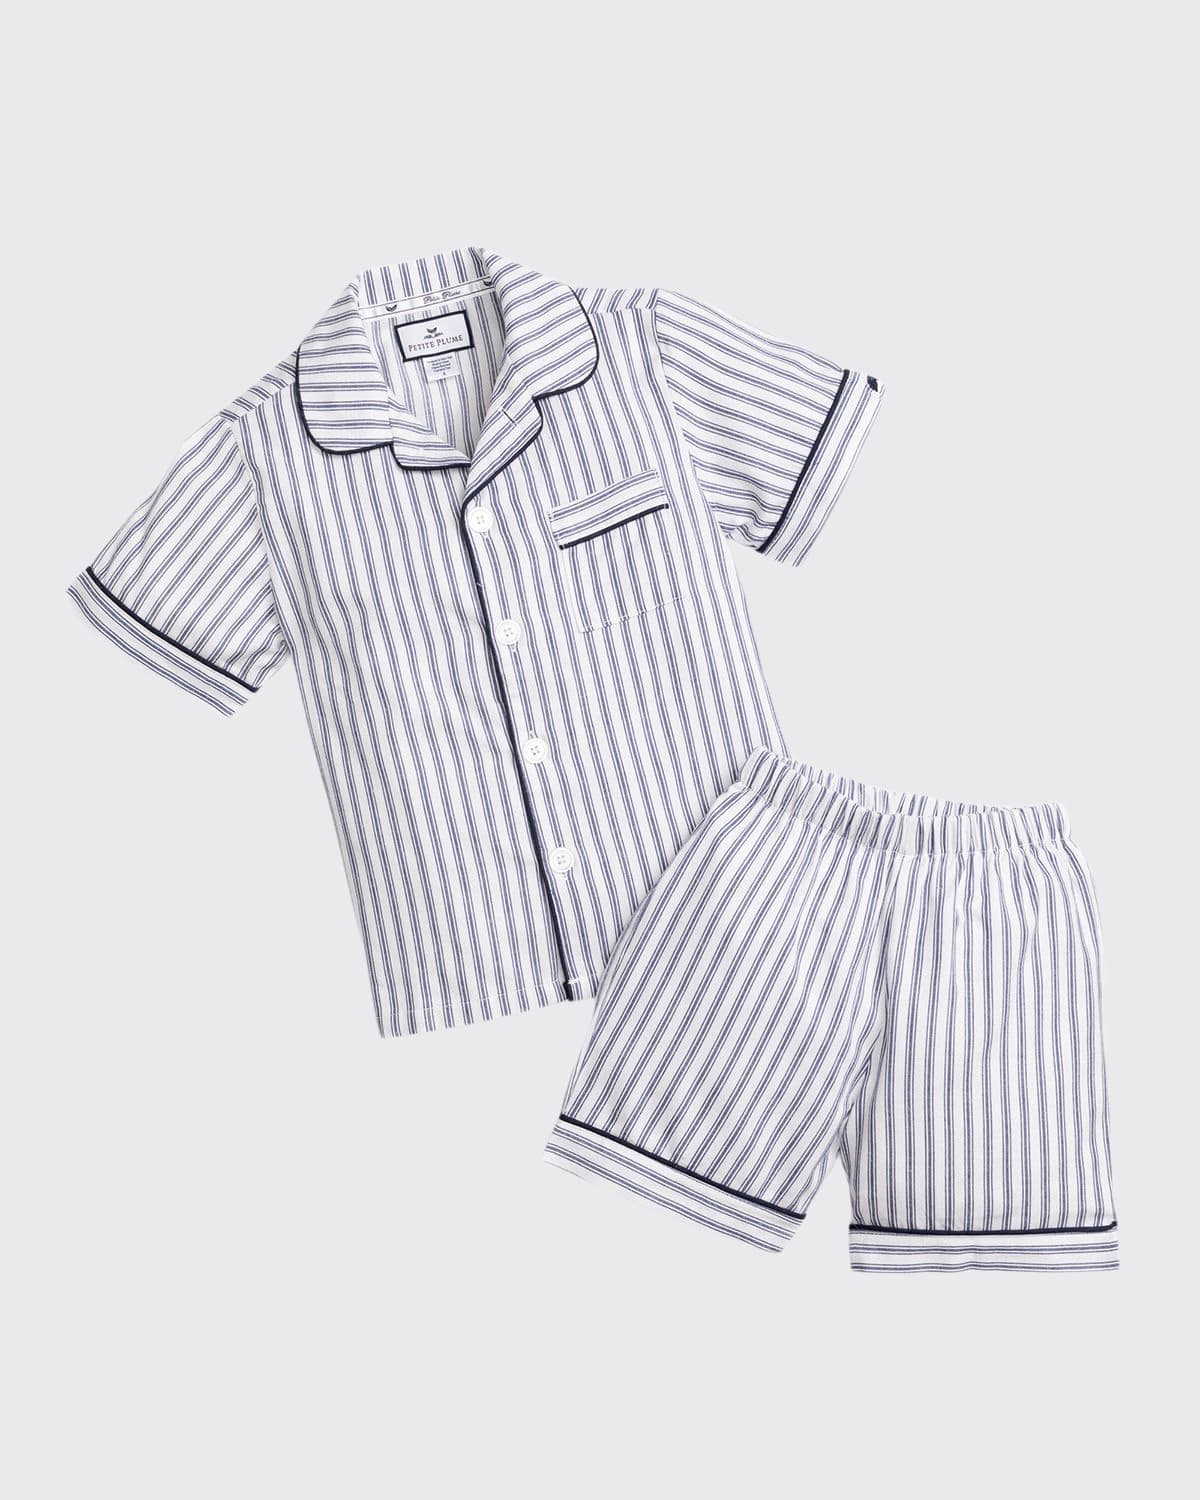 Petite Plume Boy's French Ticking Striped Pajama Set w/ Contrast Piping, Size 6M-14